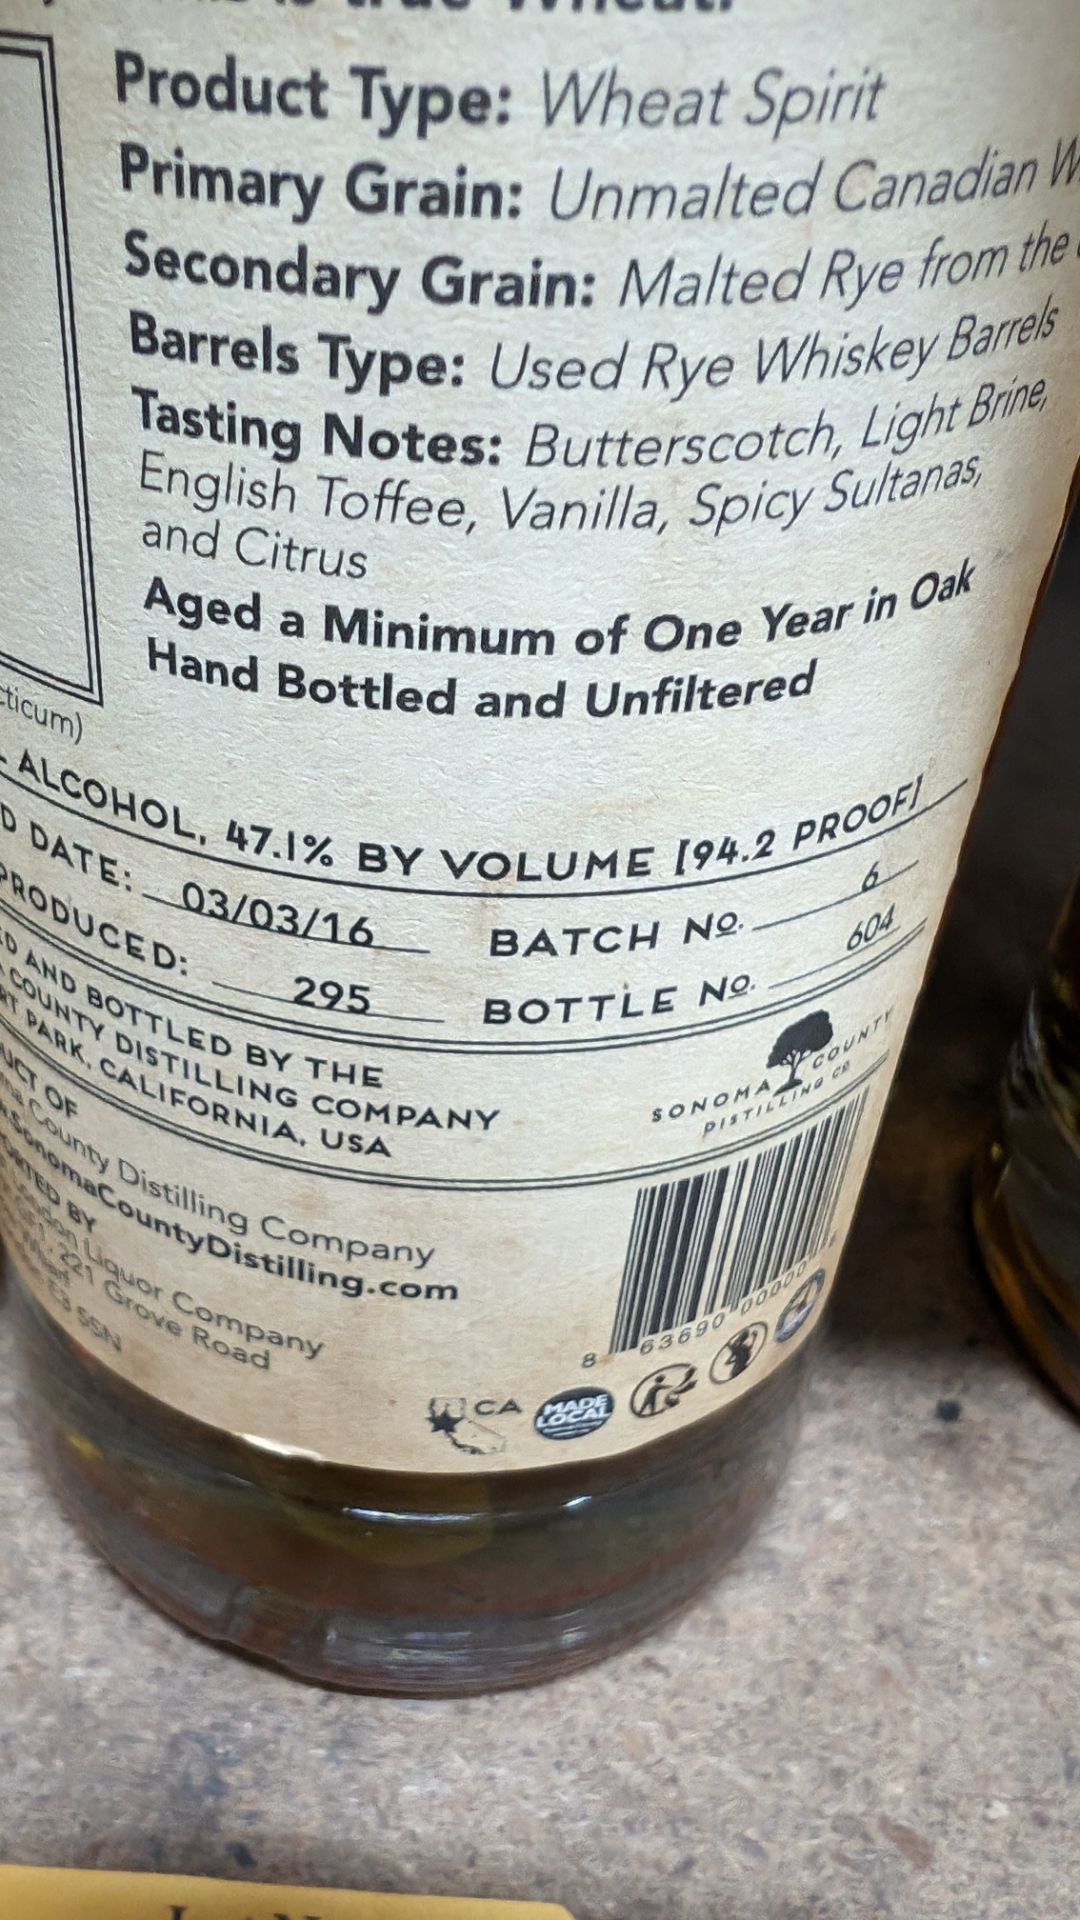 1 off 700ml bottle of Sonoma County 2nd Chance Wheat Double Alembic Pot Distilled Whiskey. 47.1% al - Image 5 of 5